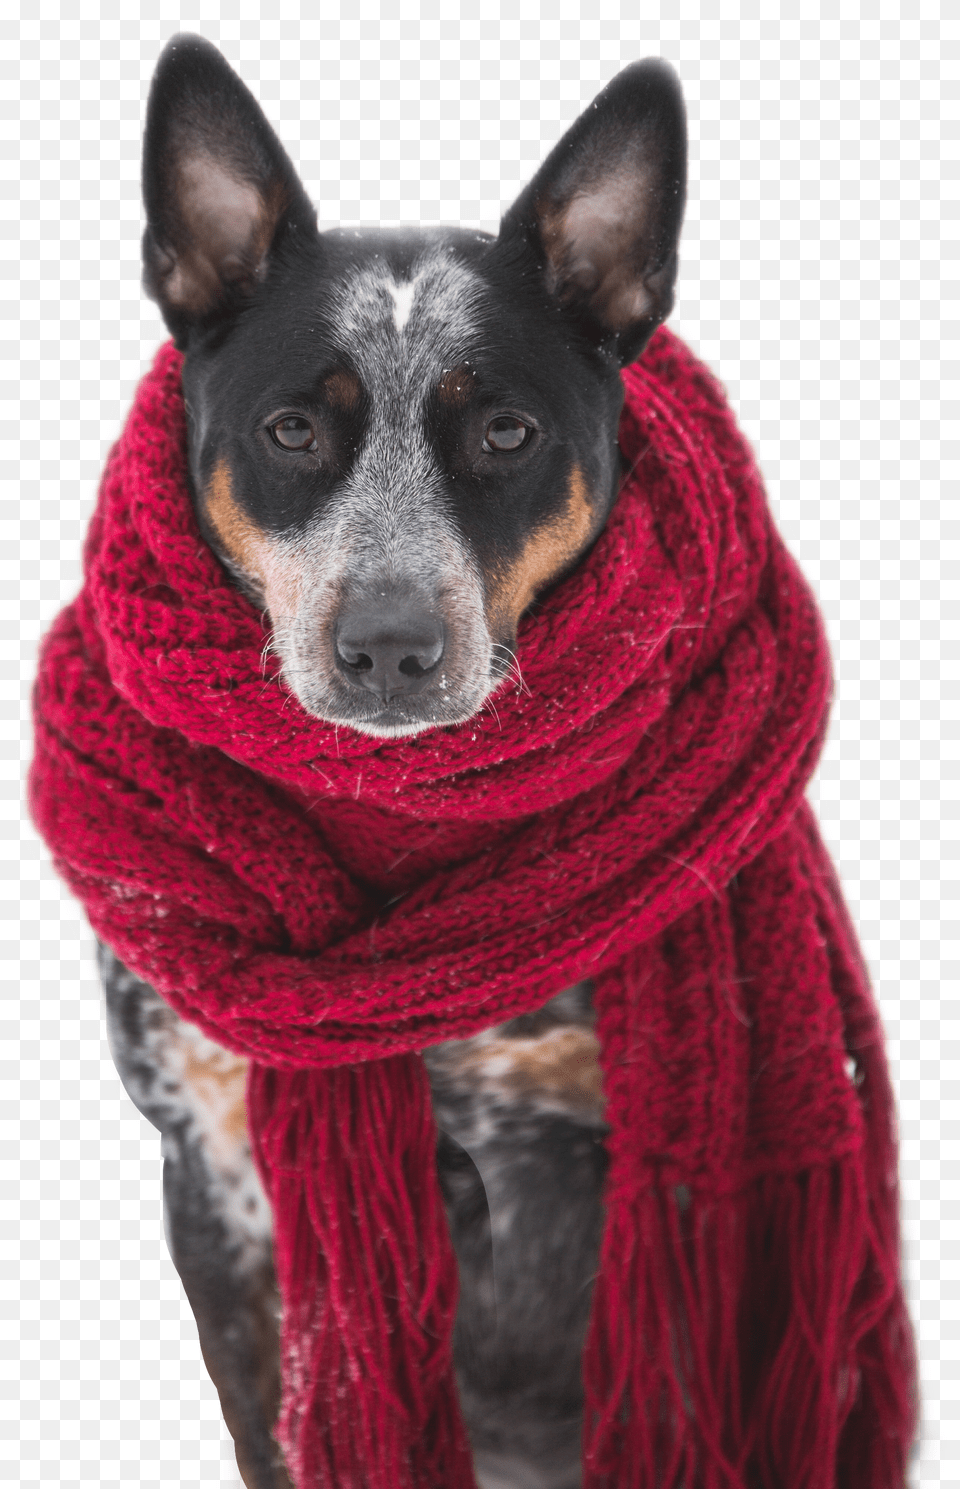 Dog Scarf Red Pet Pets Animals Dogs Wearing Scarves In The Snow Free Transparent Png